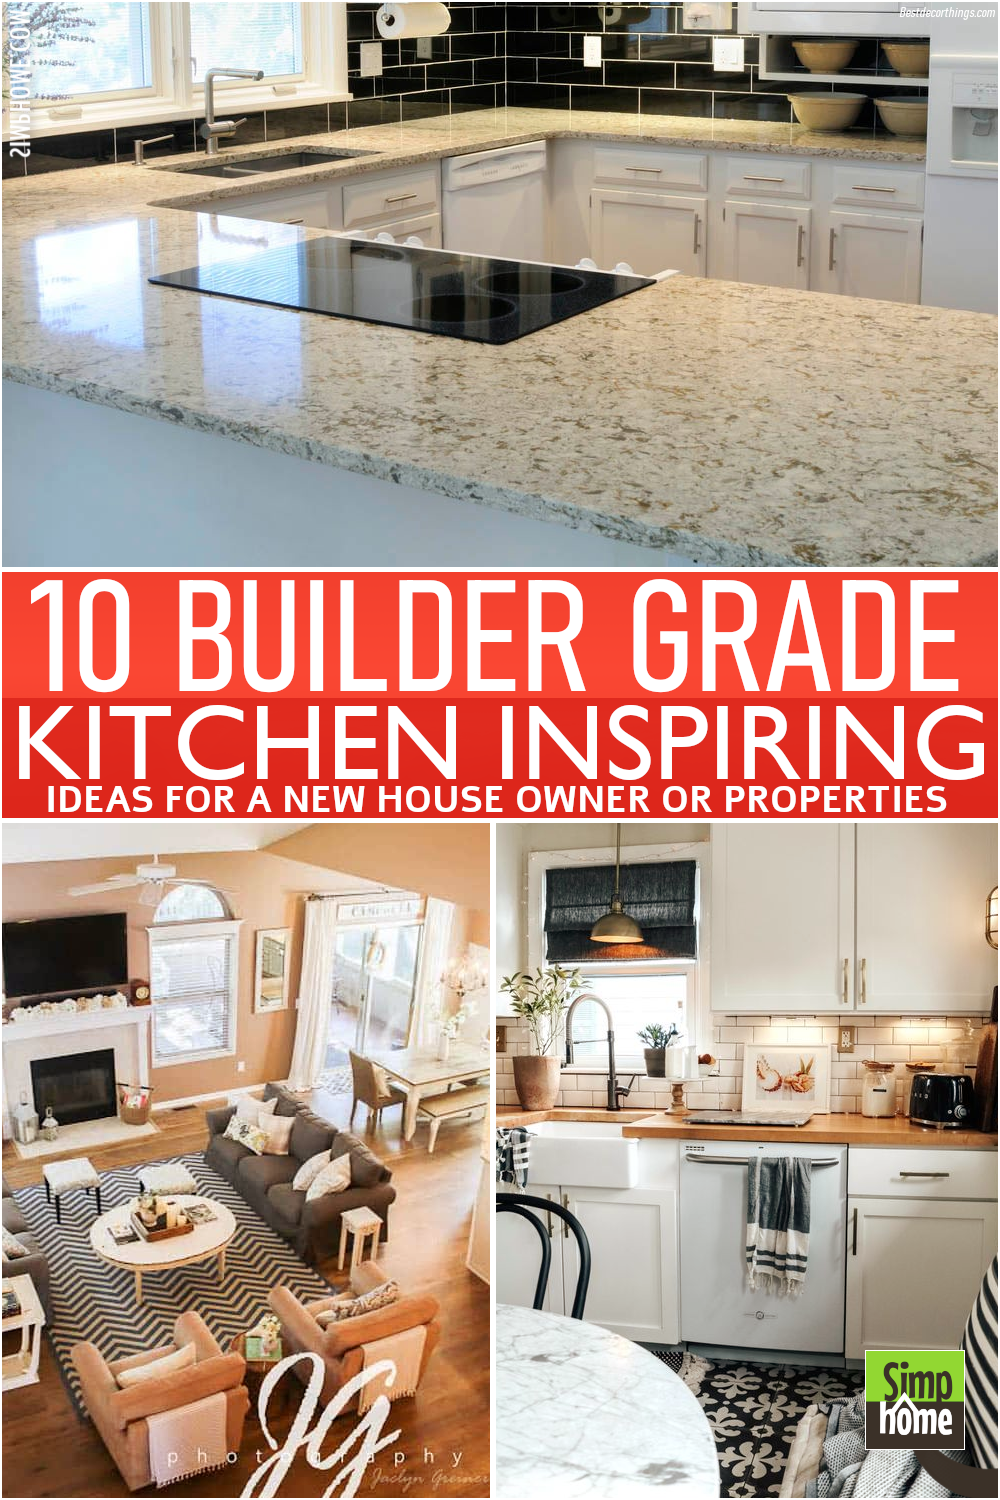 10 Builder Grade Kitchen Inspirations from Simphome